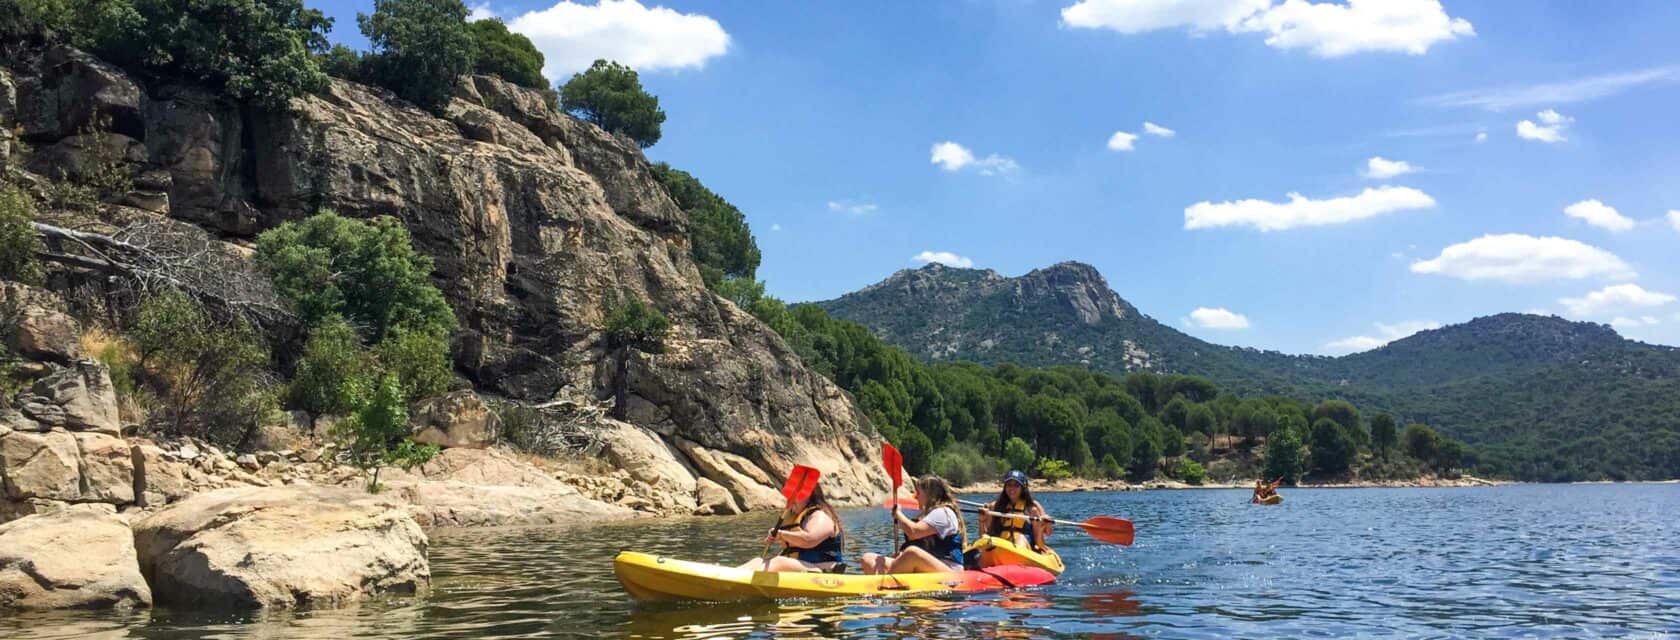 Students kayaking on an excursion.